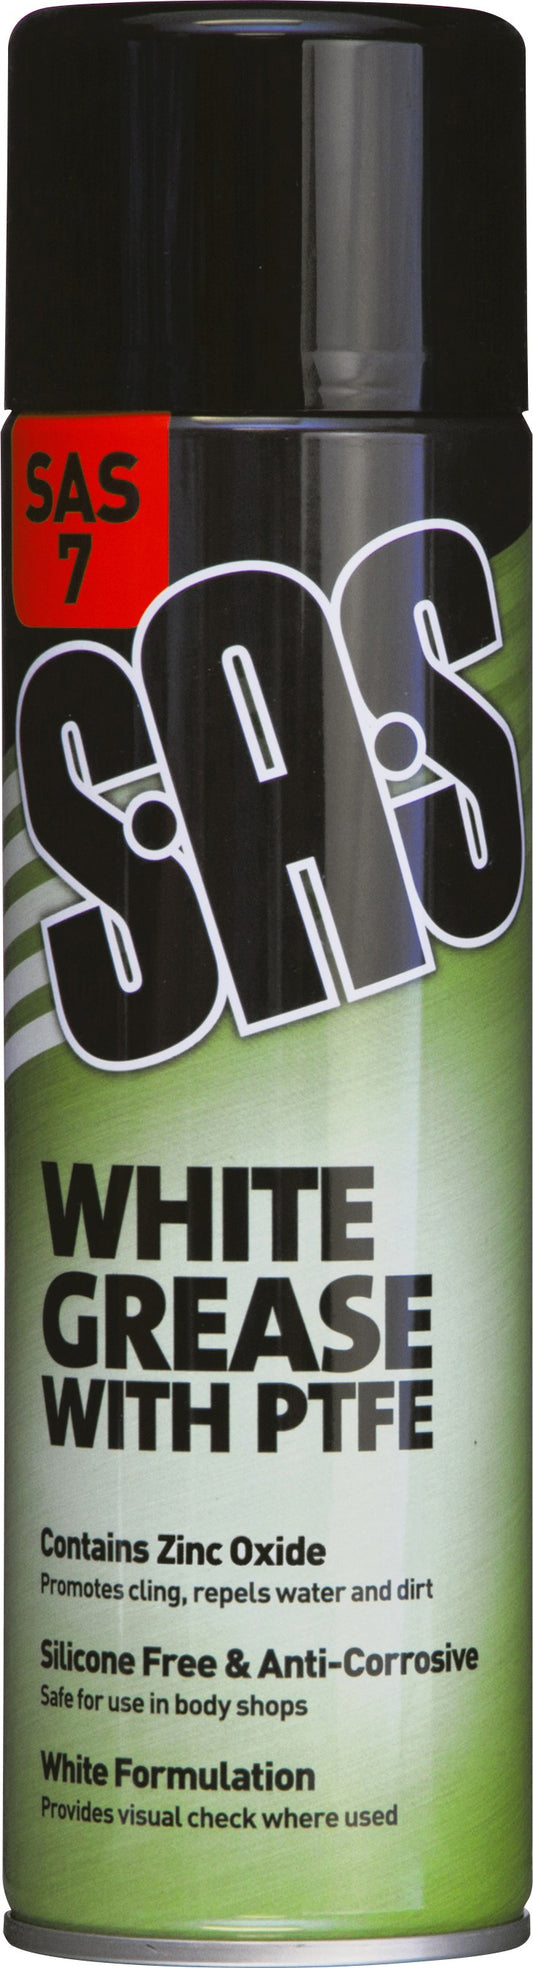 S.A.S White Grease 500ml